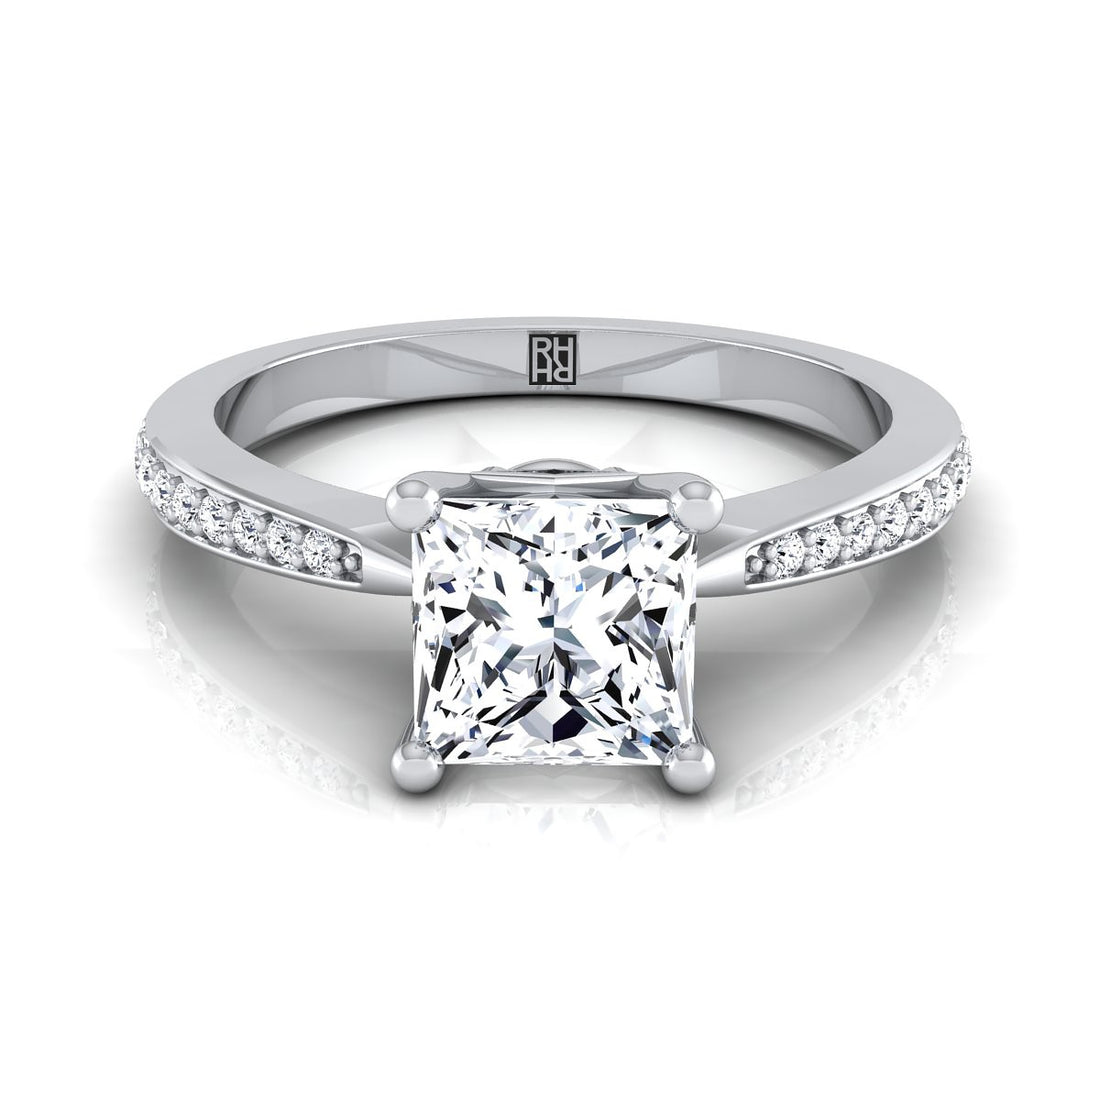 Why Elongated Diamond Rings are Immensely Popular